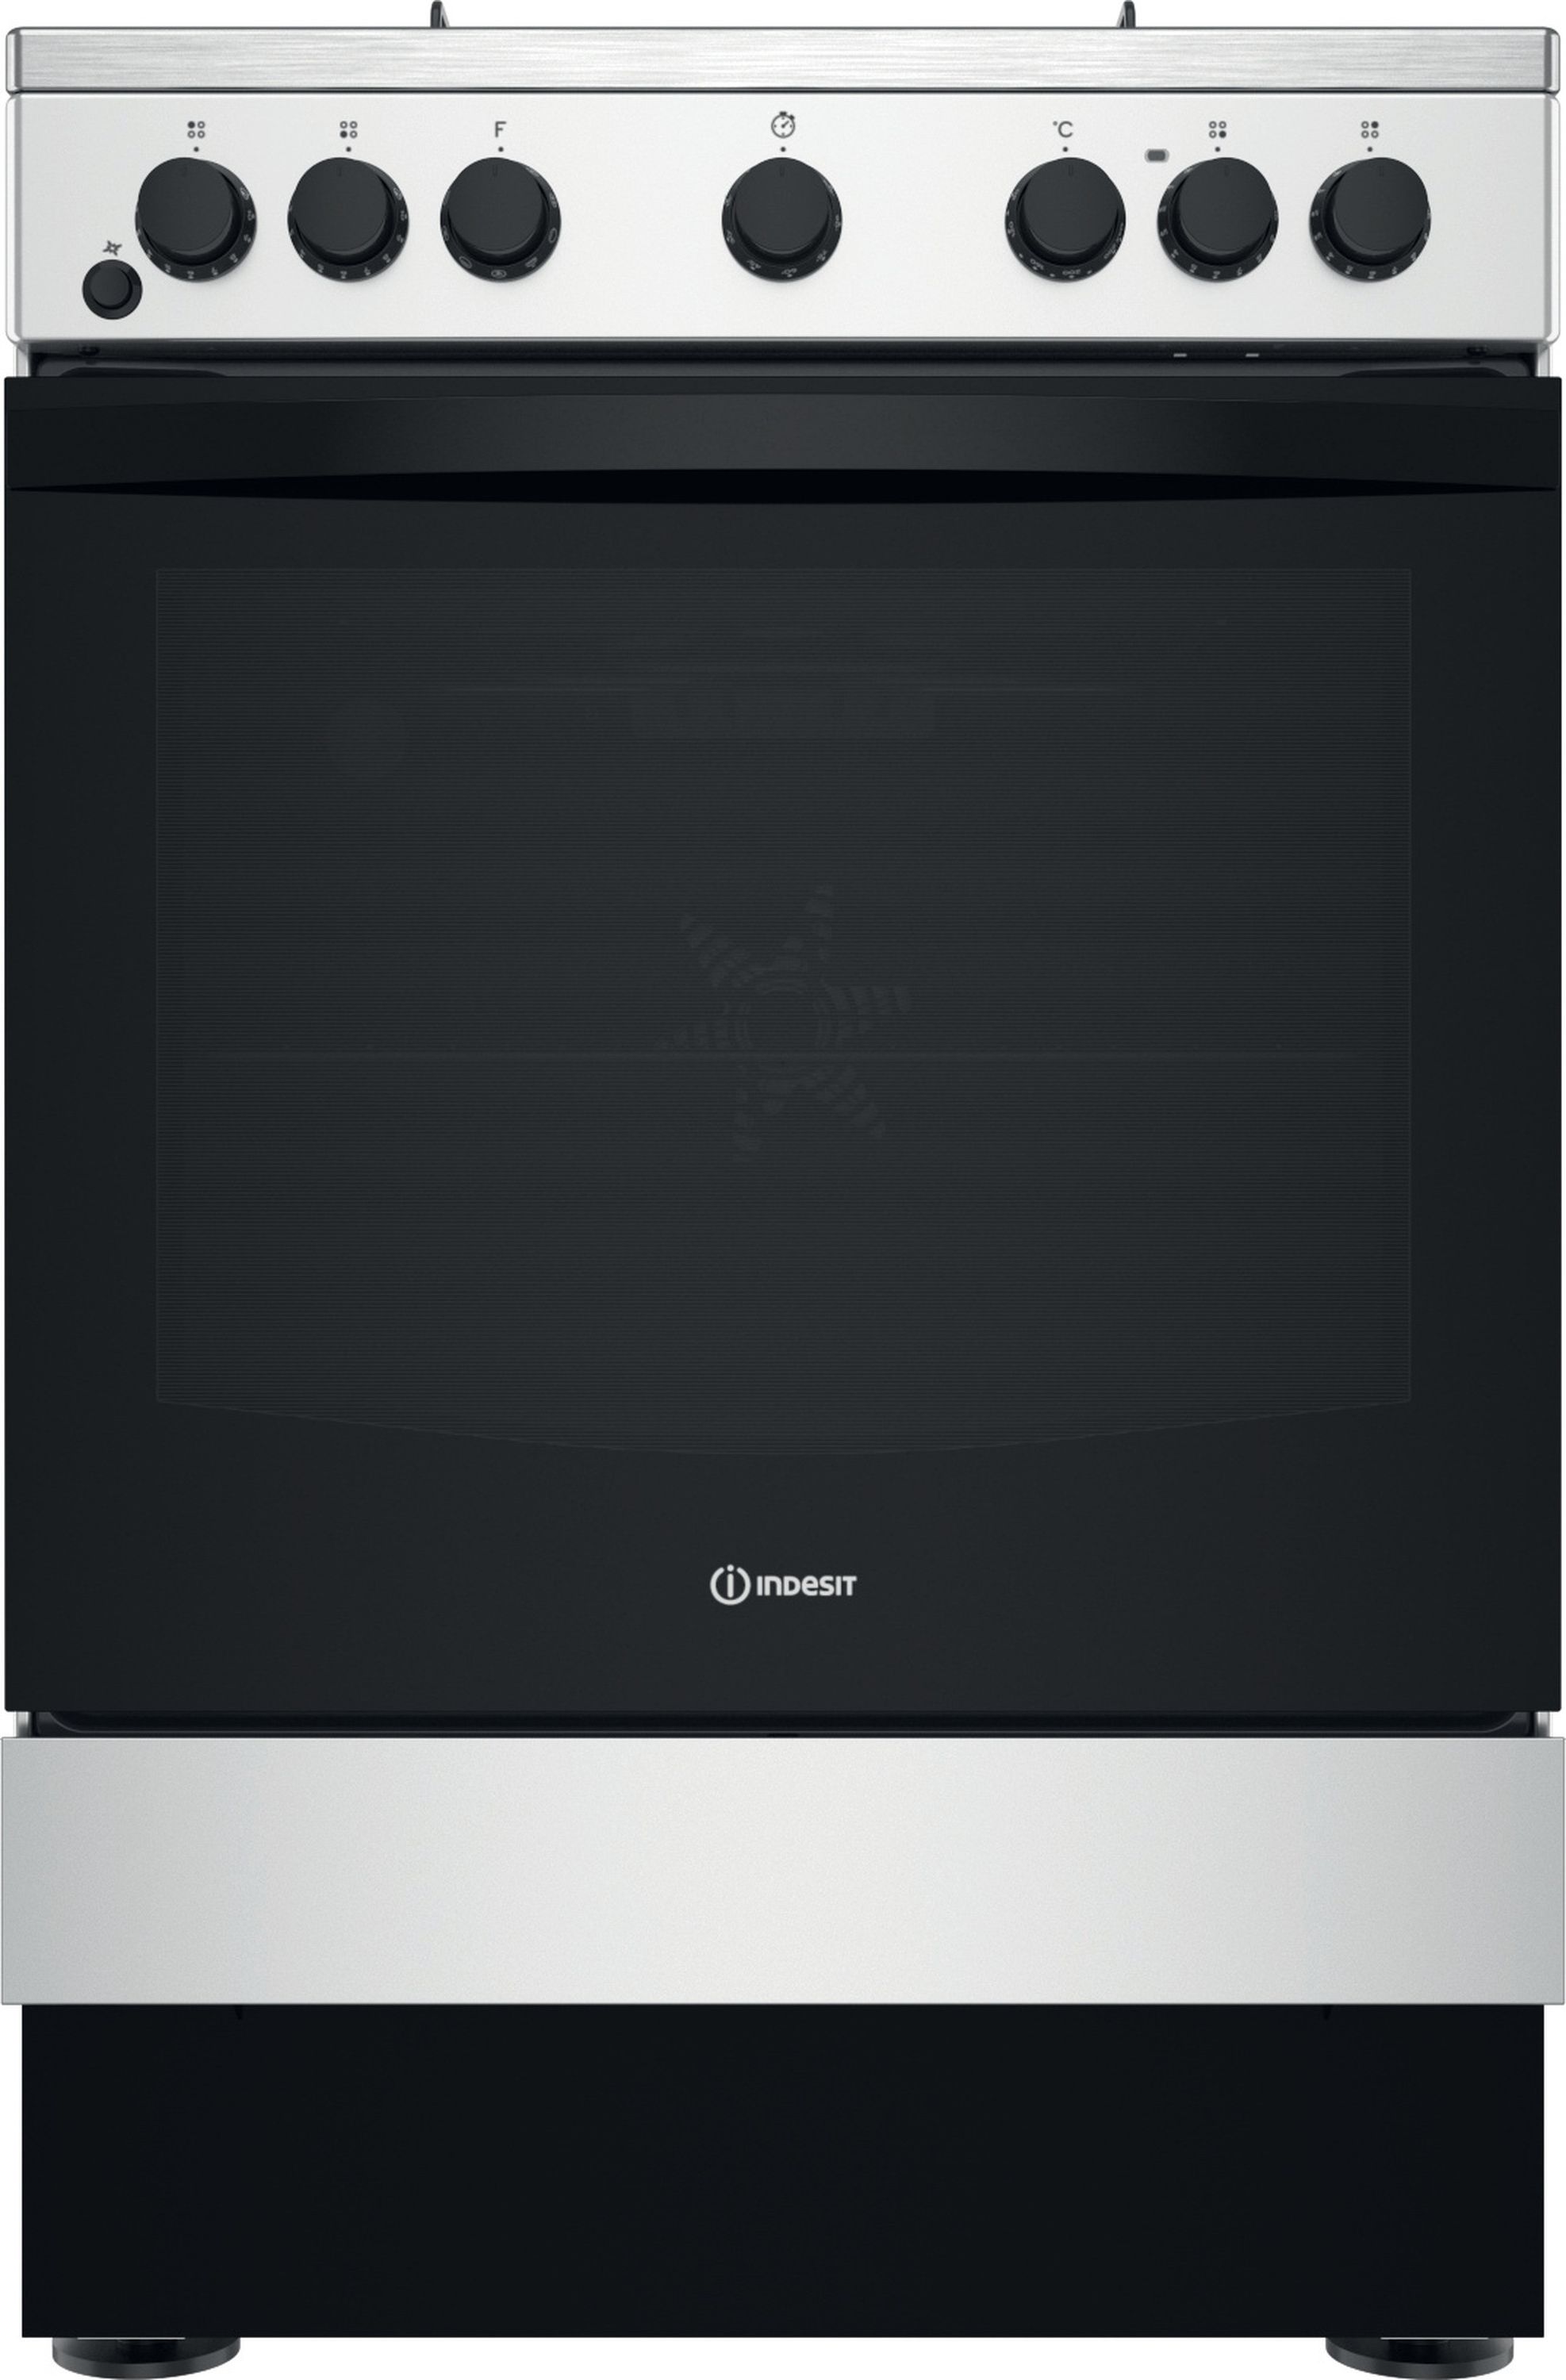 Indesit IS67G5PHX/UK 60cm Freestanding Dual Fuel Cooker - Inox - A Rated, Stainless Steel